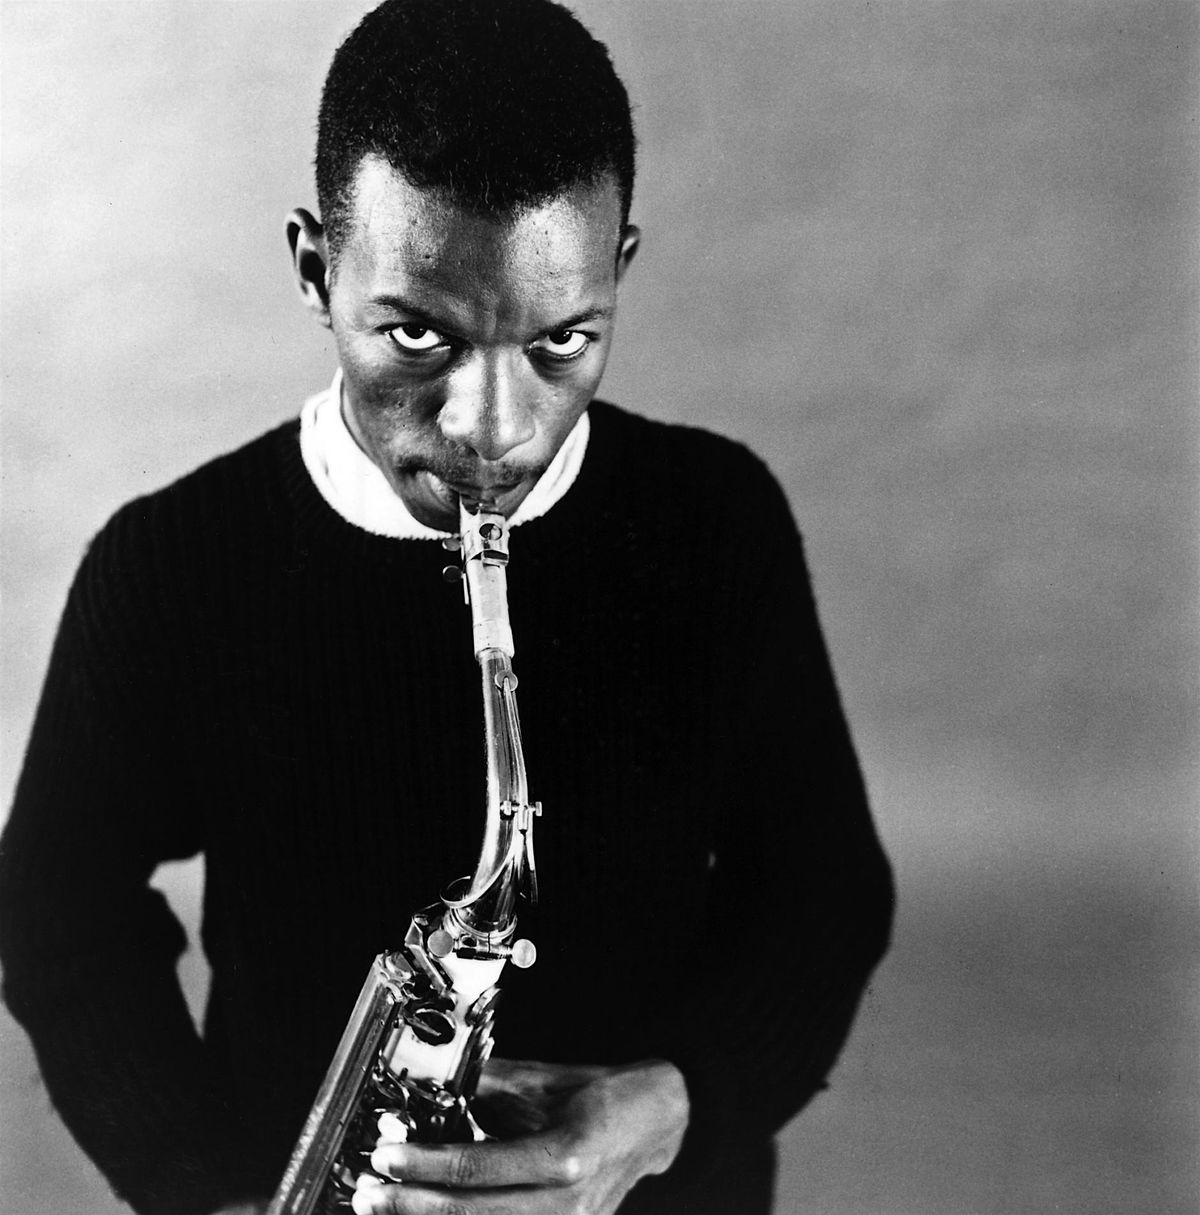 Crisis! The Music Of Ornette Coleman